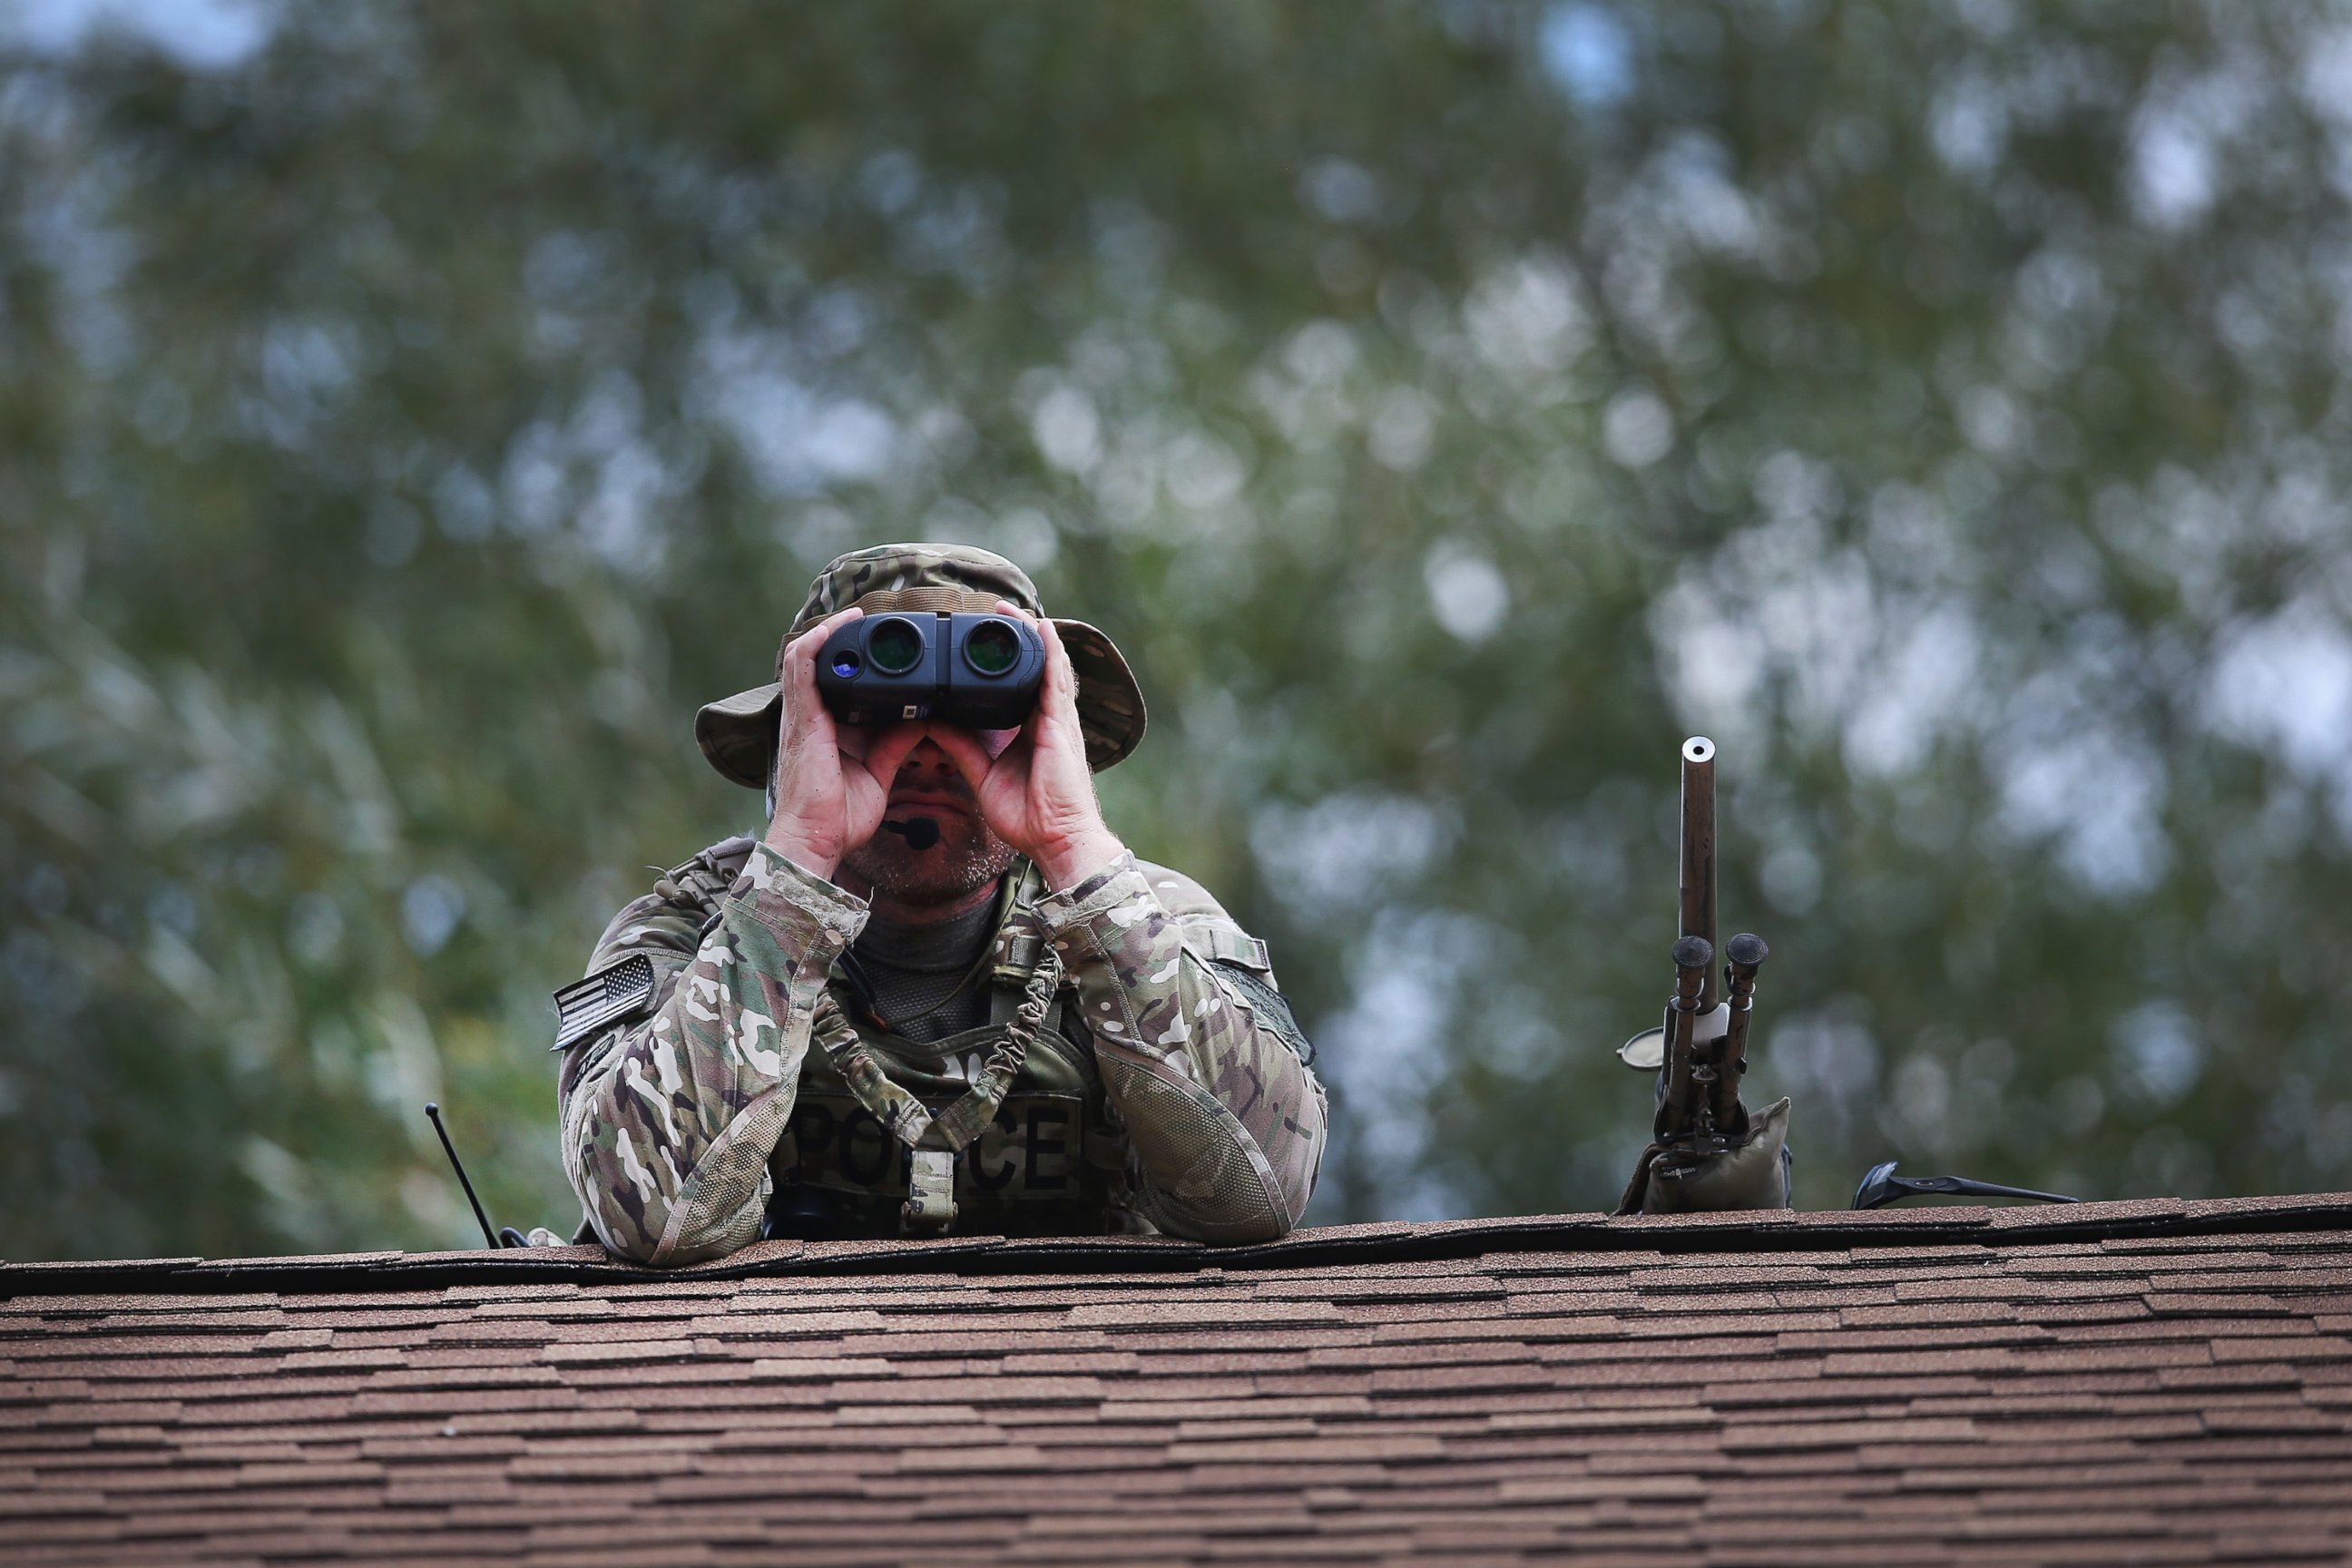 PHOTO:A police sniper keeps watch from the roof of a home while other police search nearby for suspects involved in the shooting of an officer, Sept. 1, 2015, in Fox Lake, Ill.  